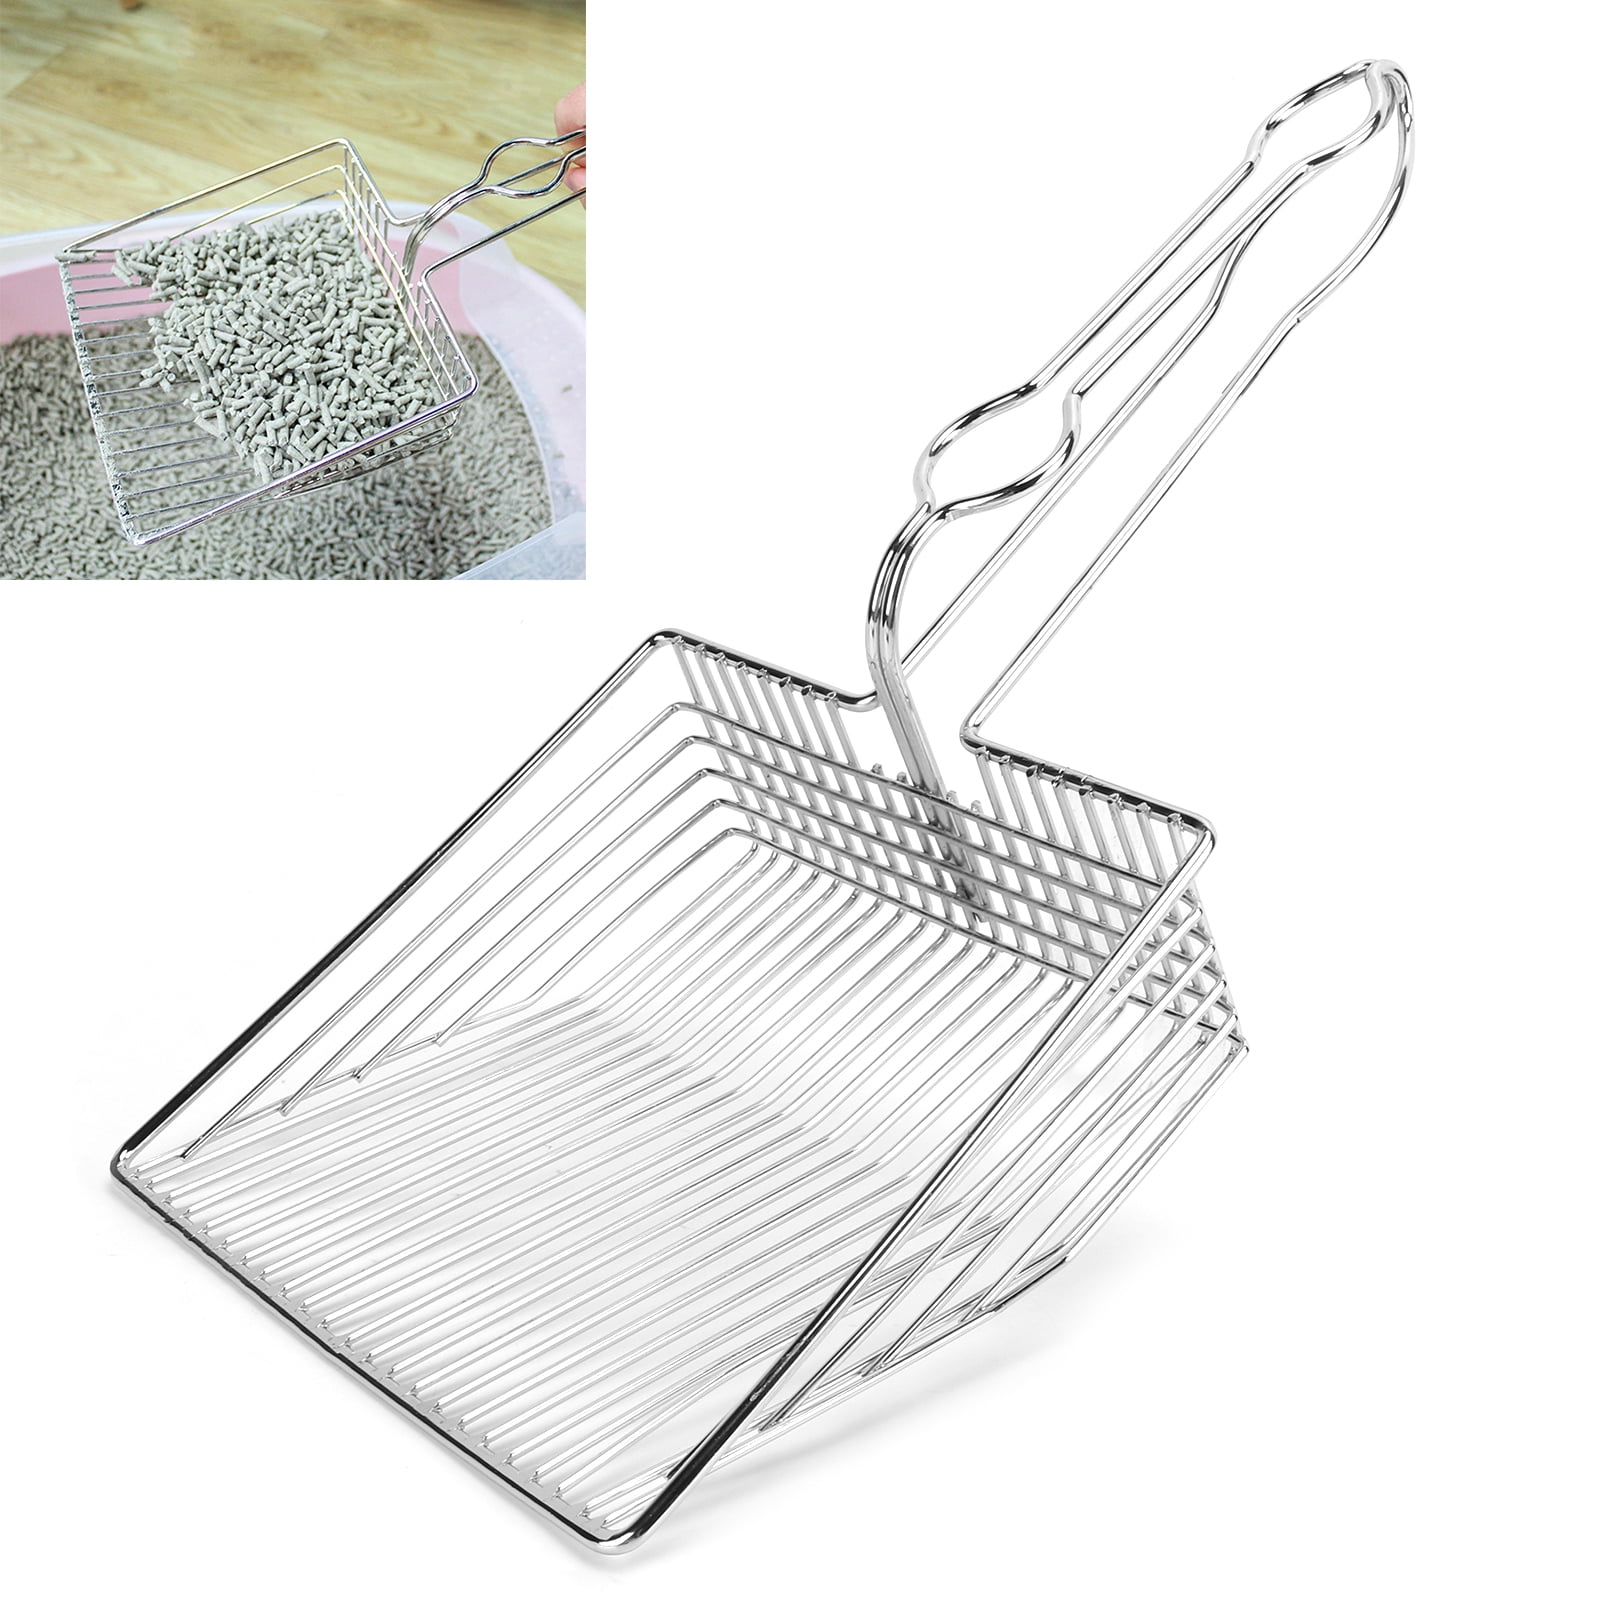  FIRSAL Small Mesh Stainless Steel Cat Litter Scoop